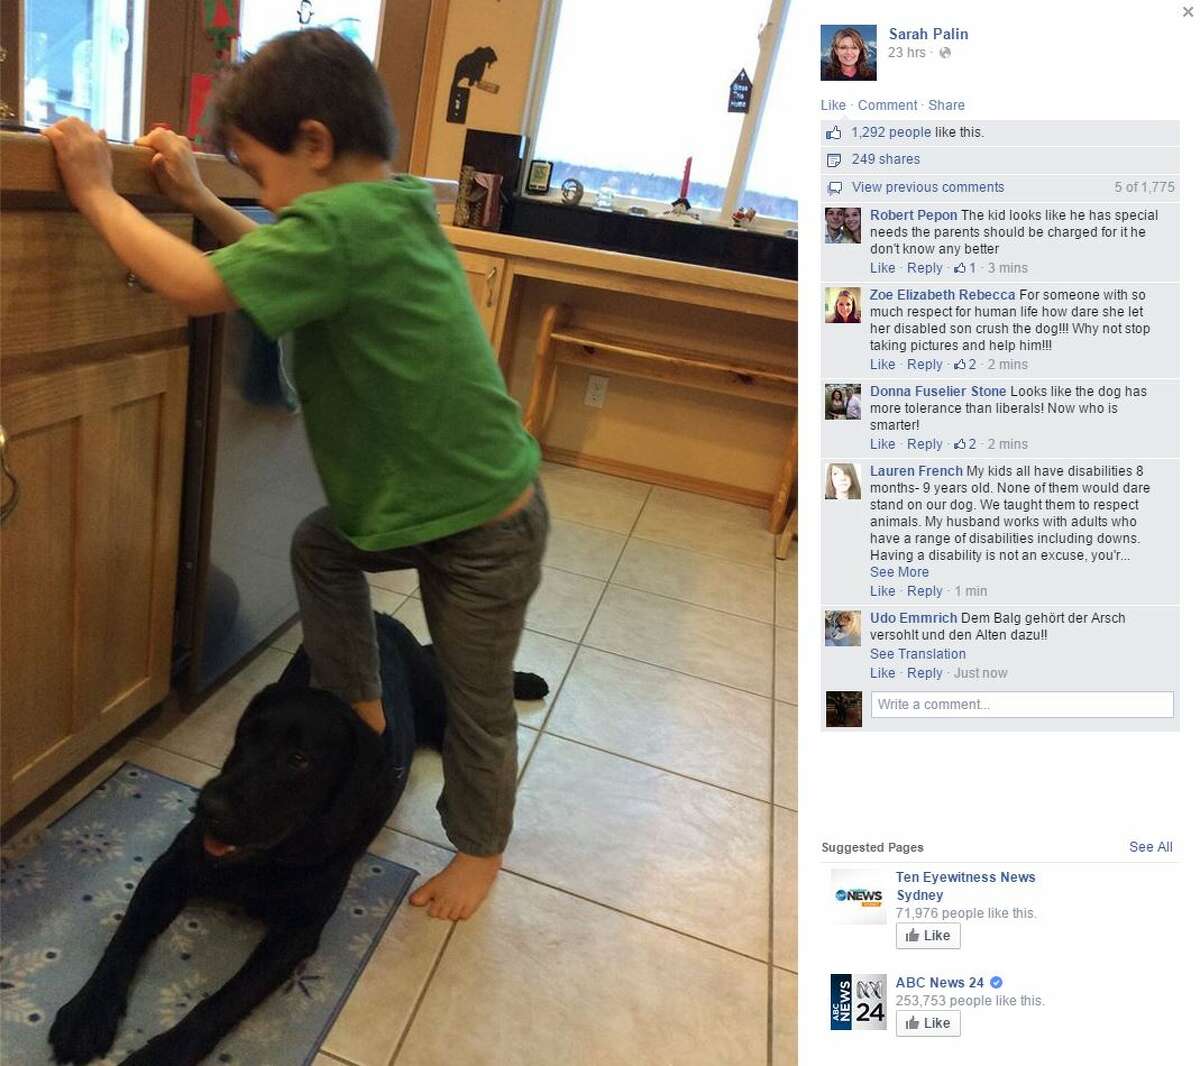 Sarah Palin, former Republican vice presidential candidate, has drawn outrage over a New Year's Day Facebook post showing her son Trig standing on the family dog.